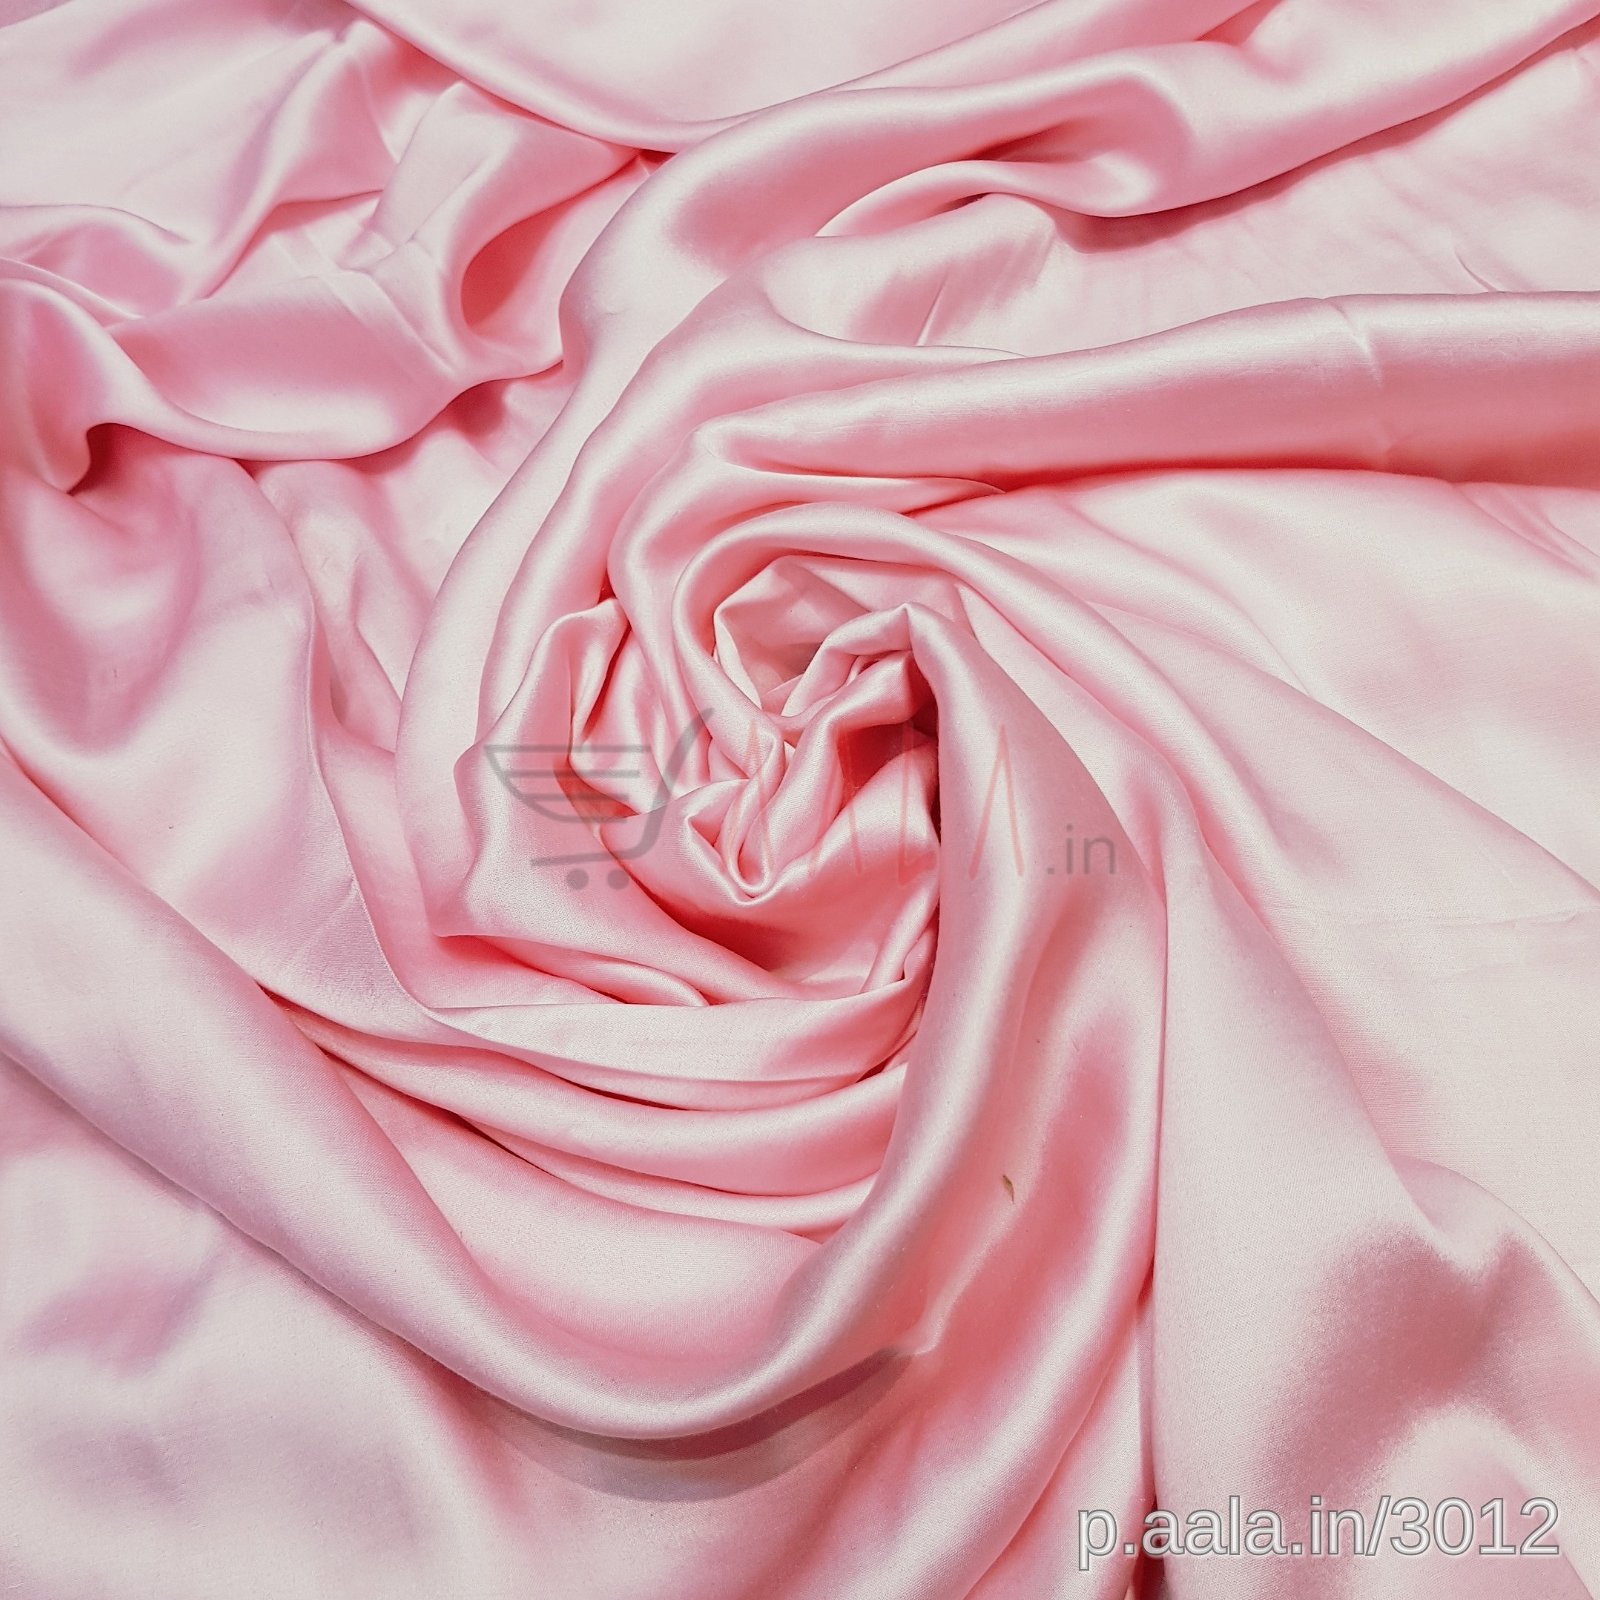 Modal Satin Viscose 44 Inches Dyed Per Metre #3012